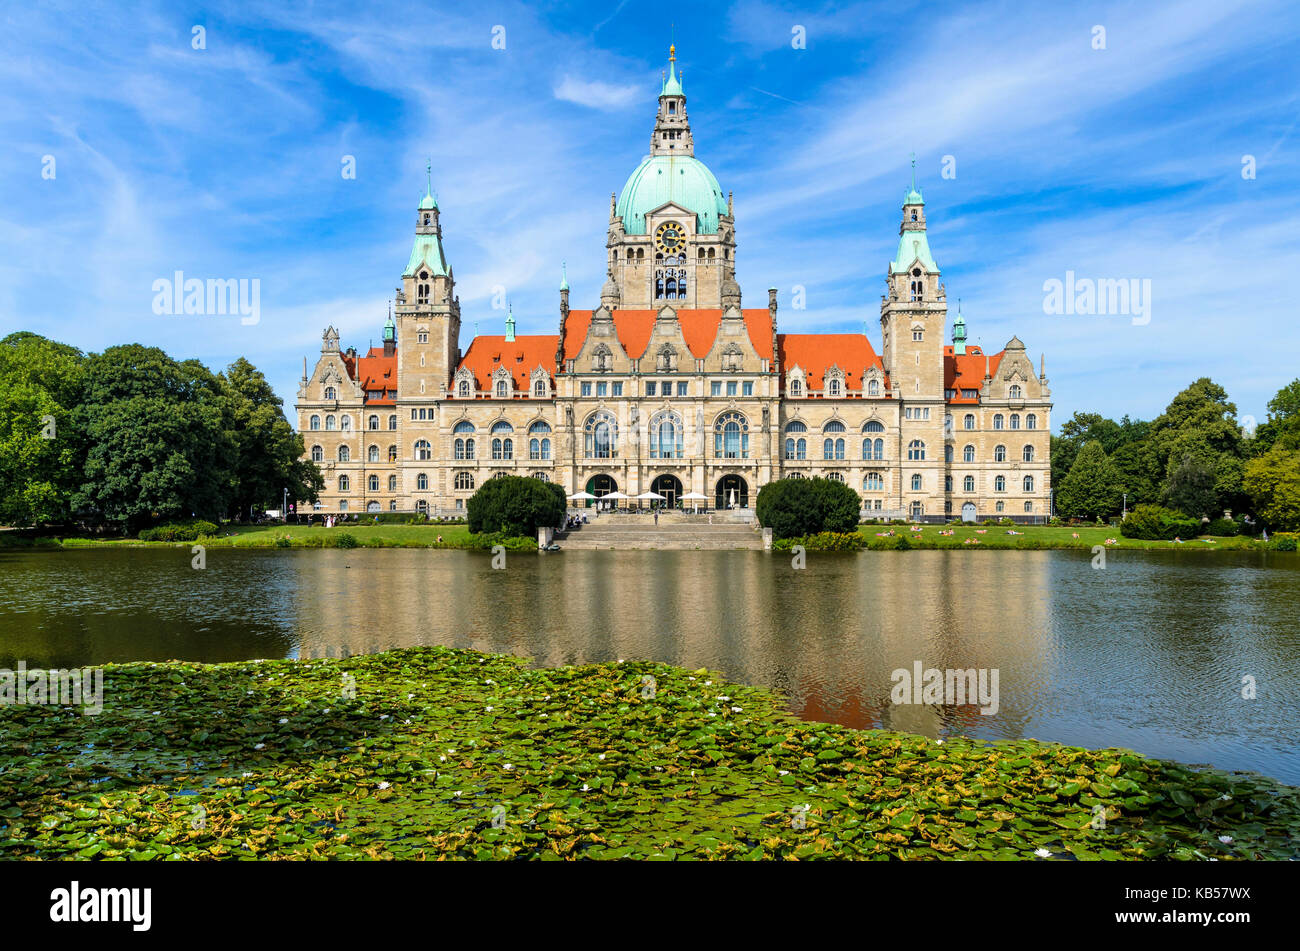 City Hall of Hannover, Germany in summer Stock Photo